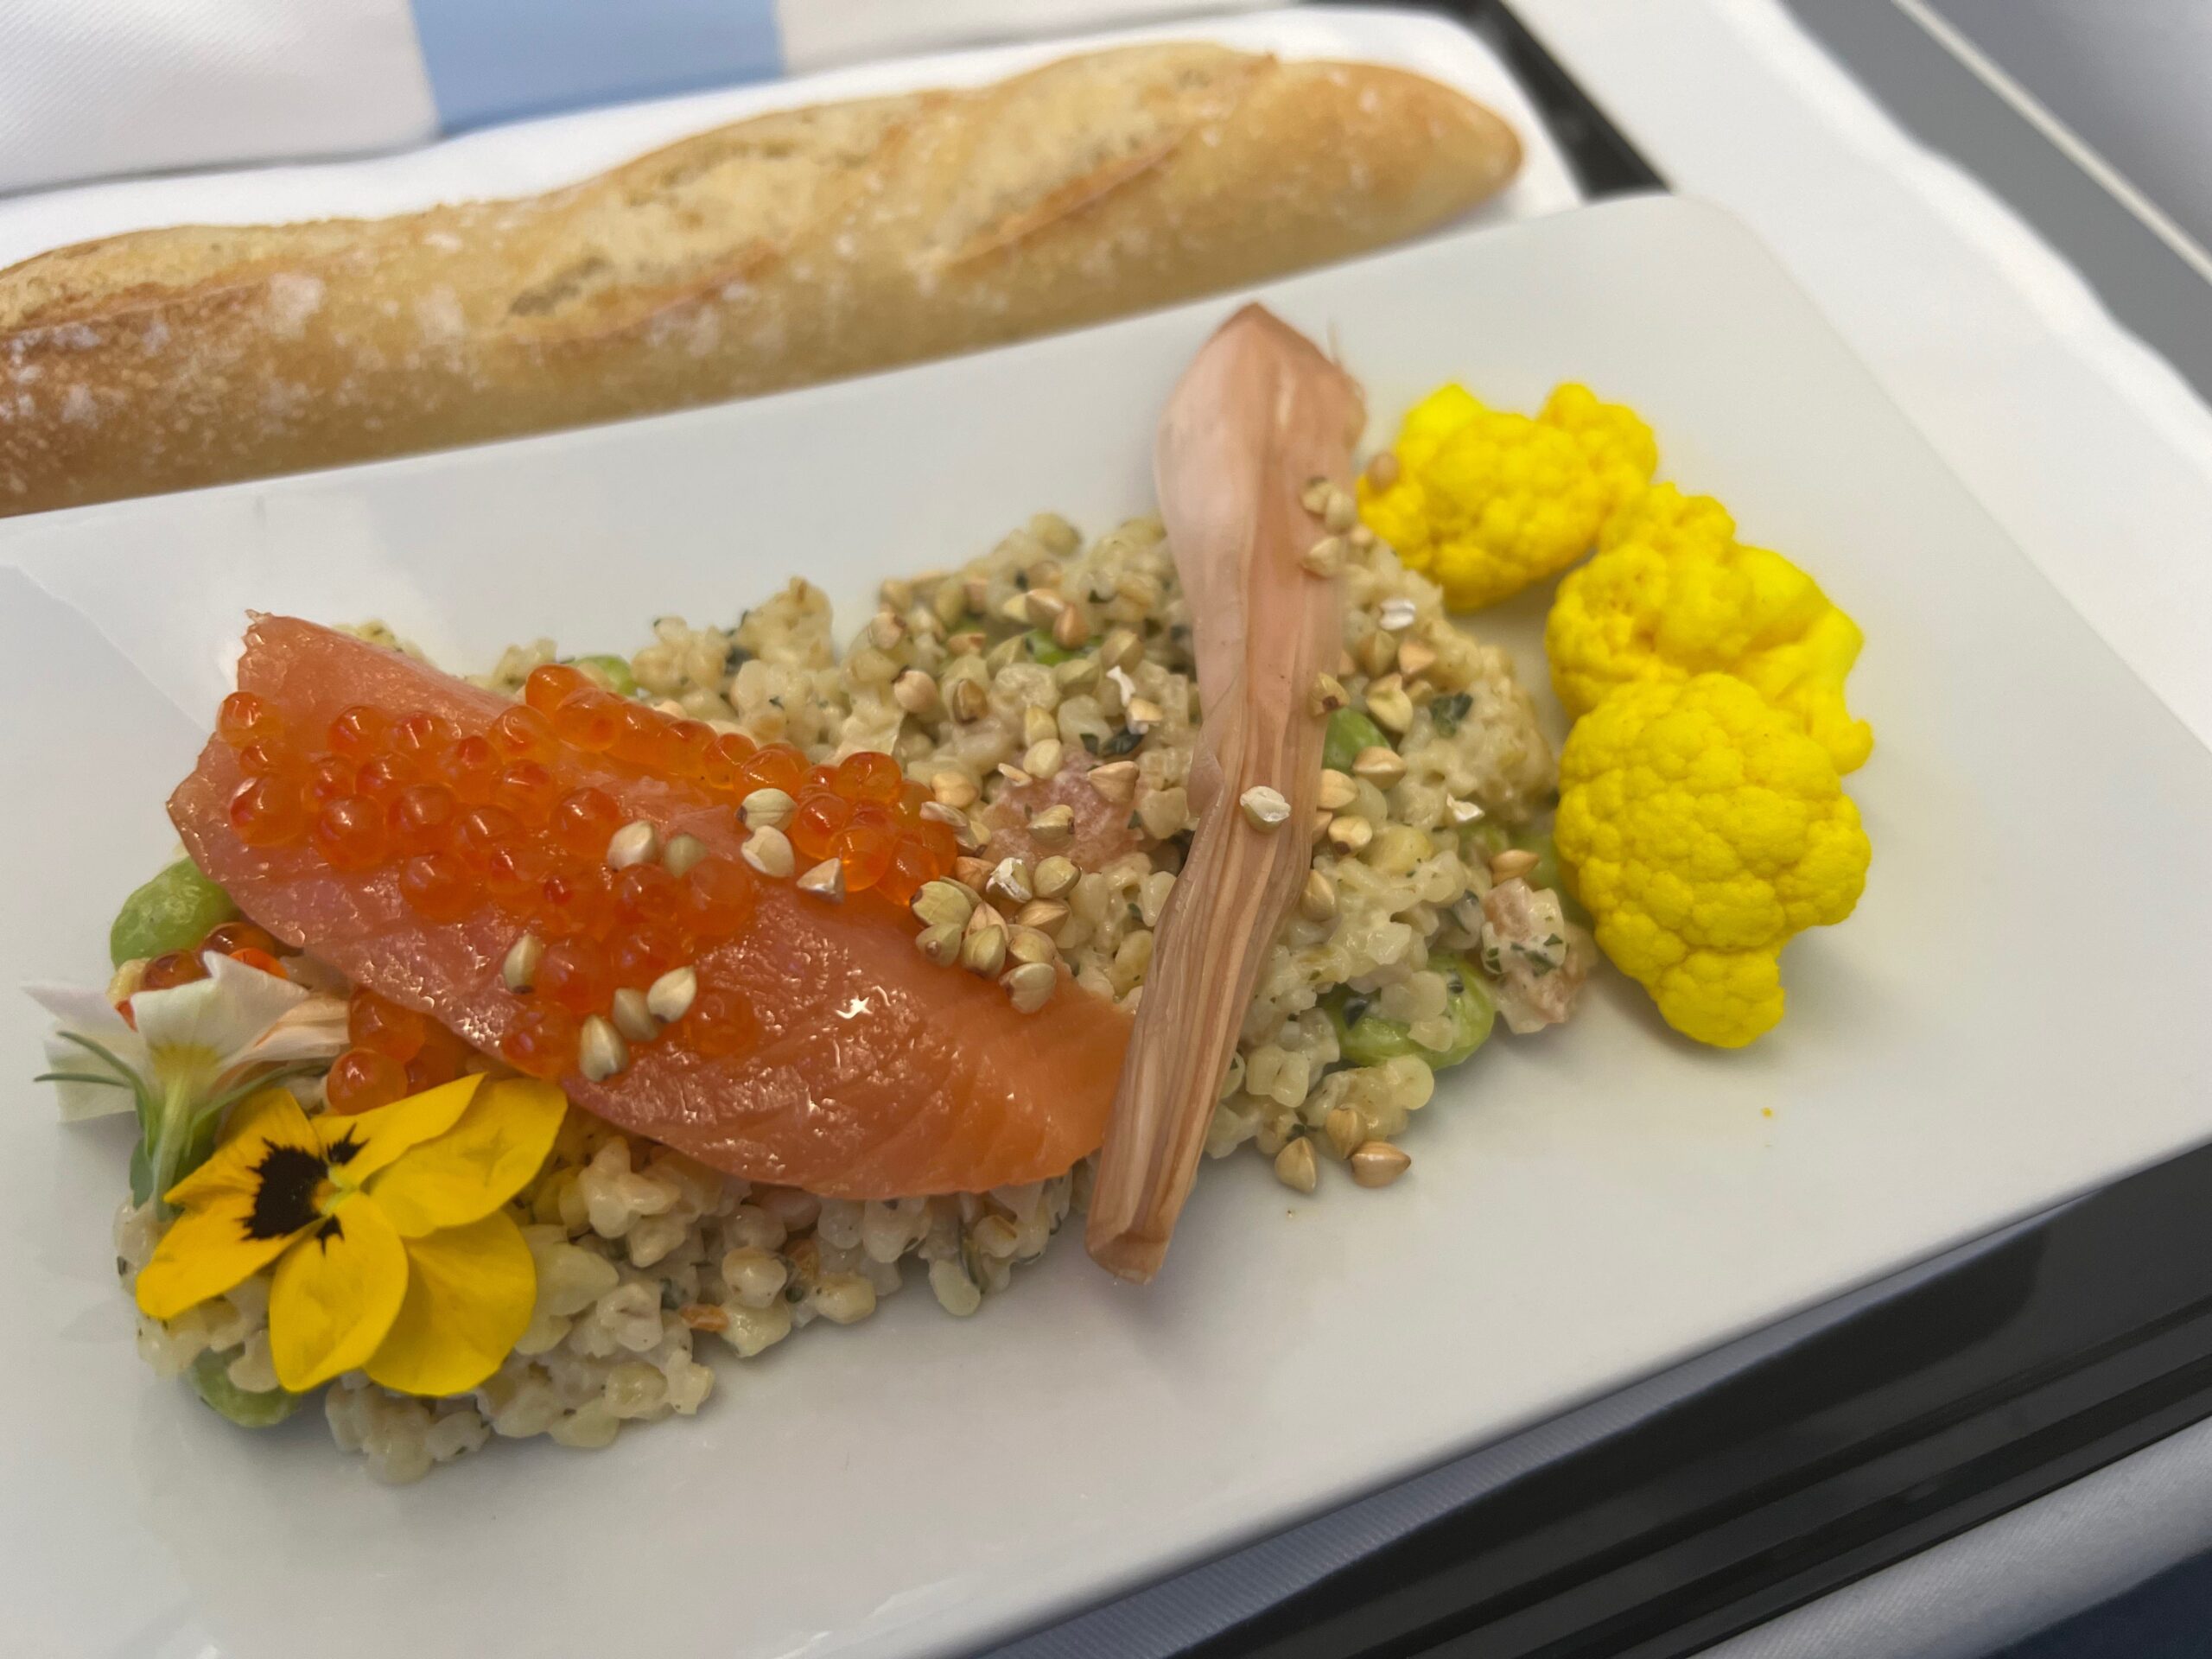 Flying on La Compagnie all-business class airline from Paris to New York &mdash; the salmon salad.